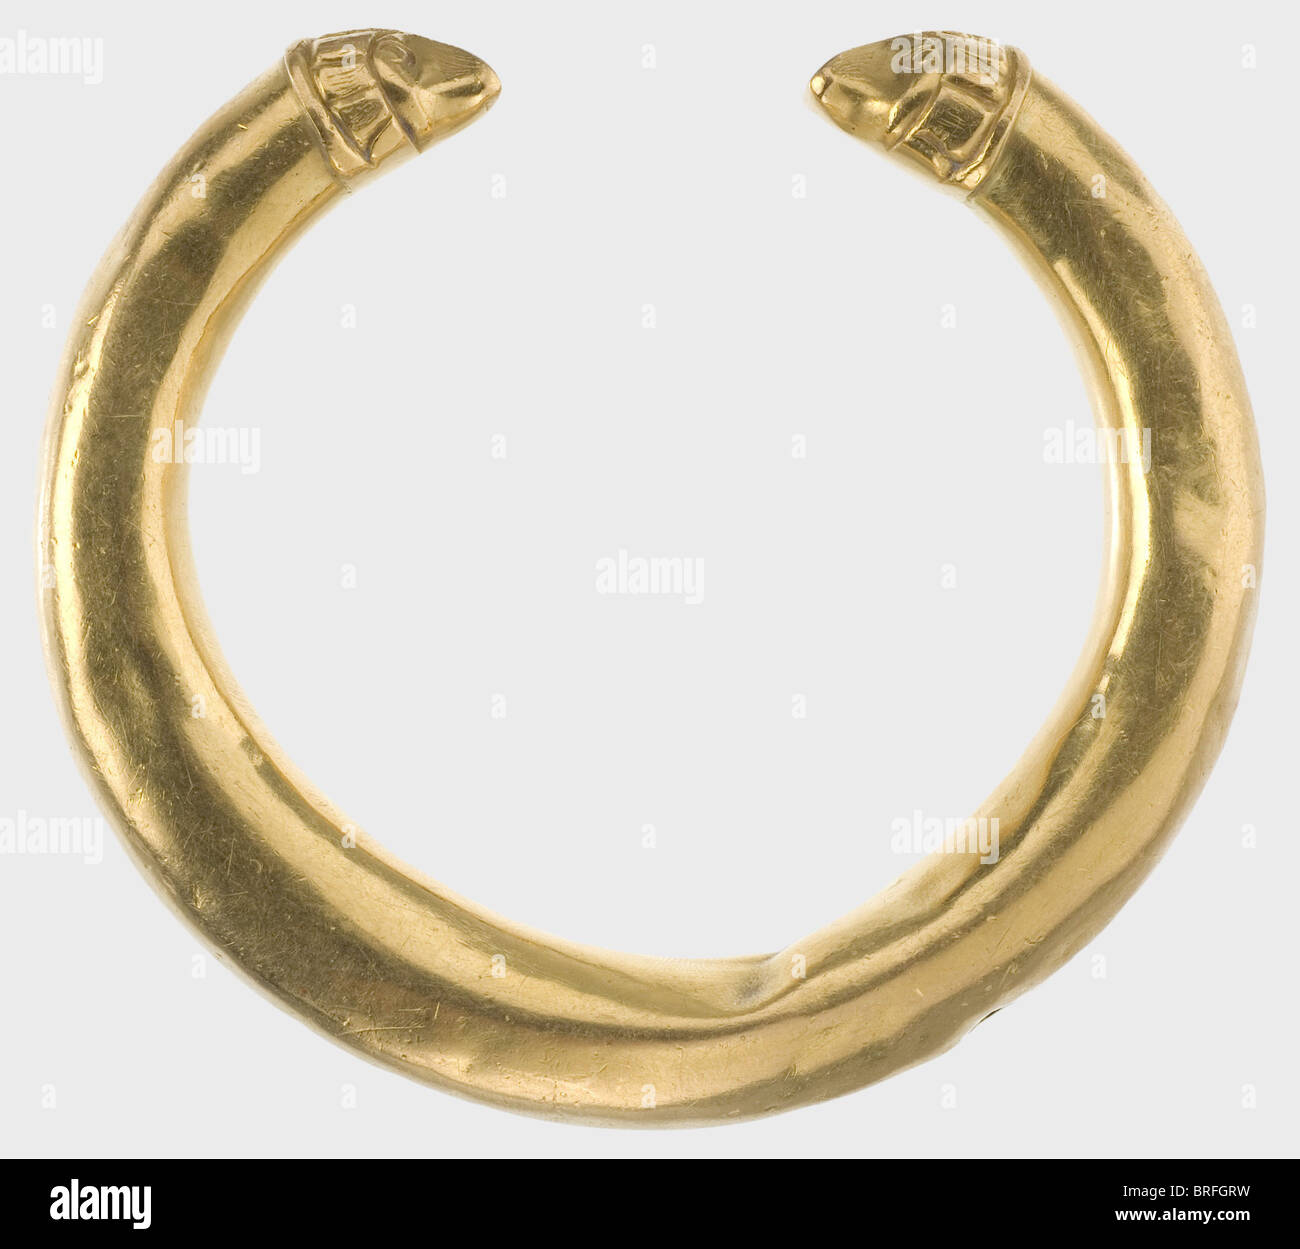 A golden Hellenistic bracelet, 3rd/2nd century B.C. Hollow, double tapered bracelet with stylized animal head finials. Somewhat dented and with a slight kink in the middle. Diameter 8.5 cm. Weight 78.5 g. historic, historical, ancient world, jewellery, jewelry, object, objects, stills, clipping, clippings, cut out, cut-out, cut-outs, Additional-Rights-Clearences-Not Available Stock Photo